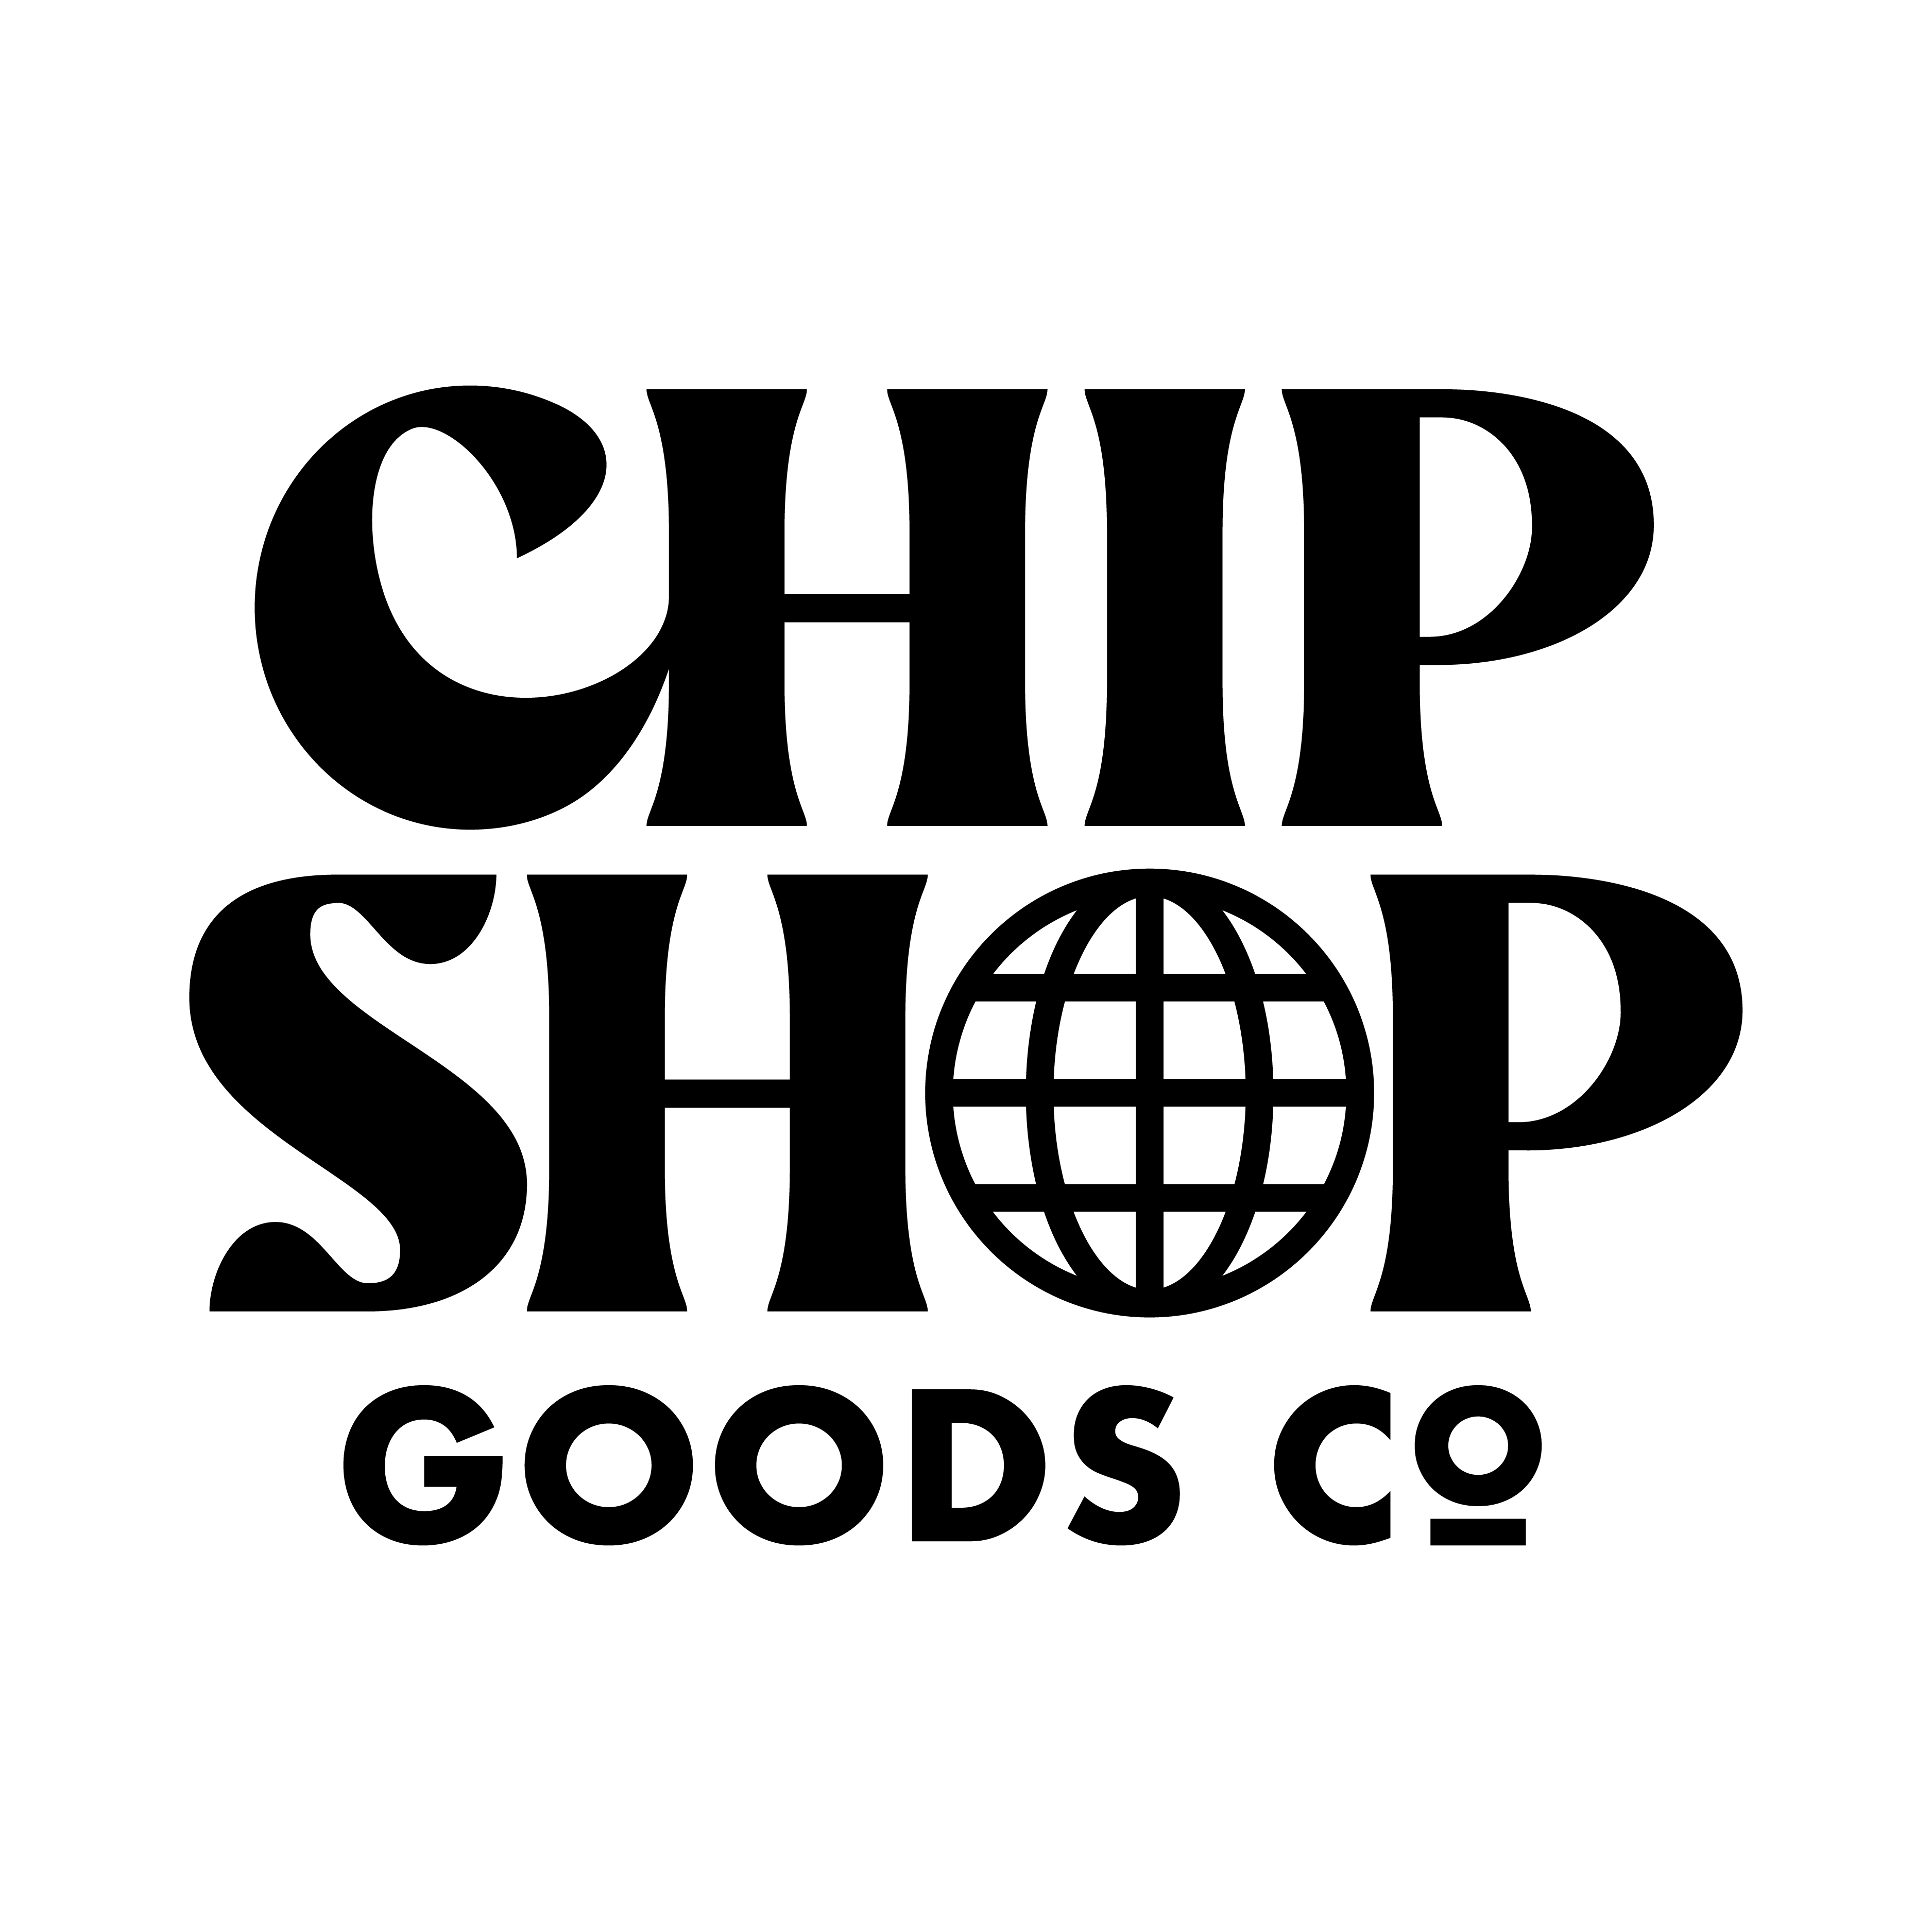 Chip Shop Goods Co logo design by logo designer Brethren Design Co. for your inspiration and for the worlds largest logo competition